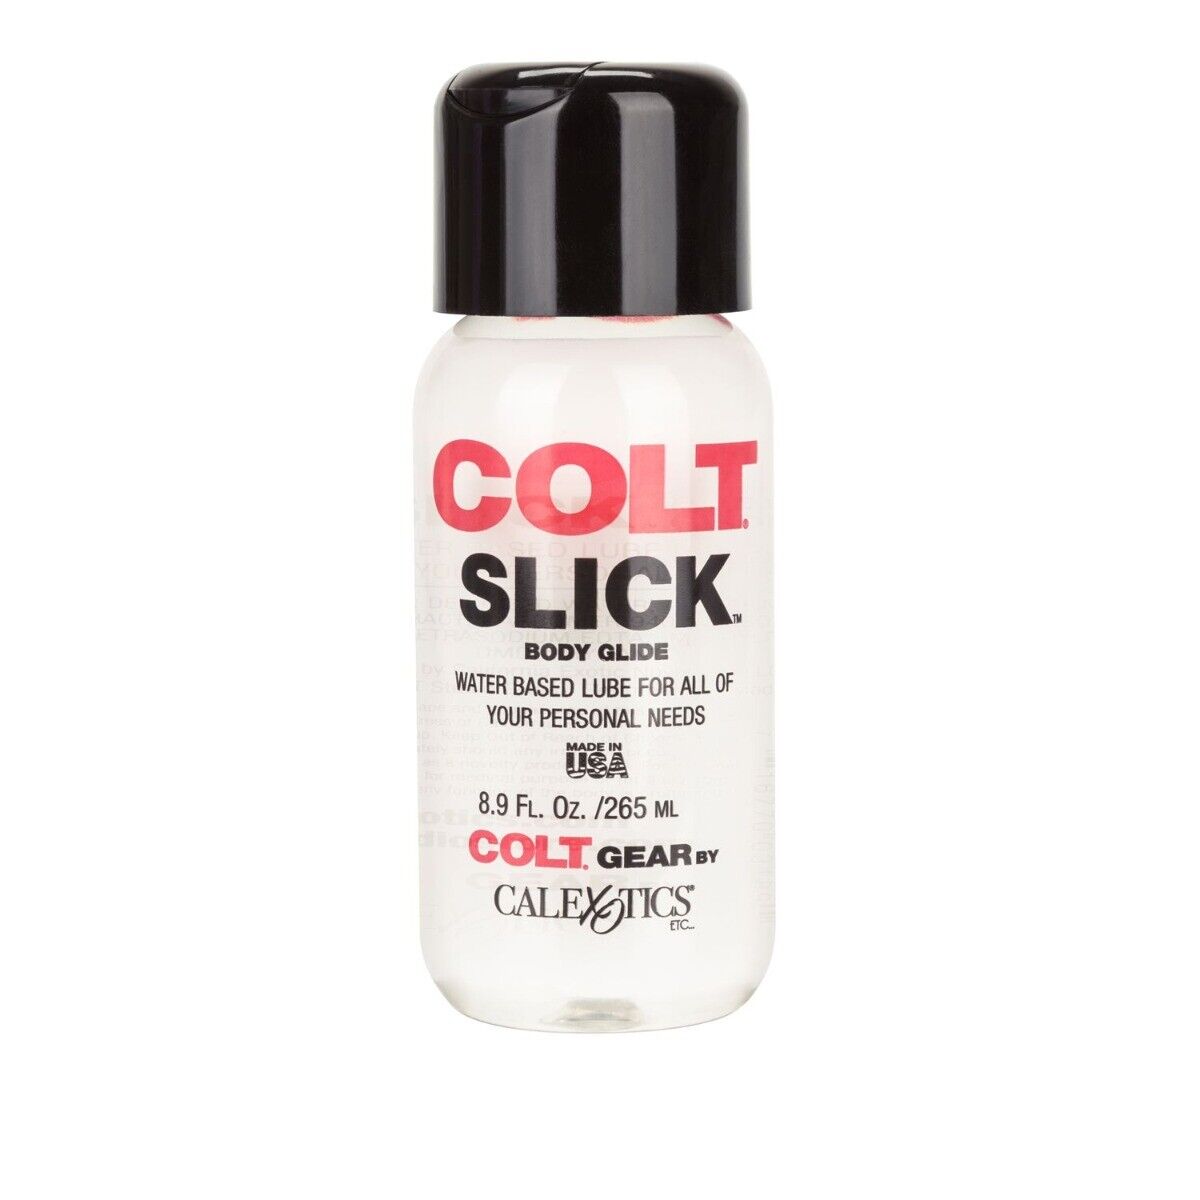 Colt Slick Personal Lubricant Water Based Massage Lube Body Glide 8.9 Oz